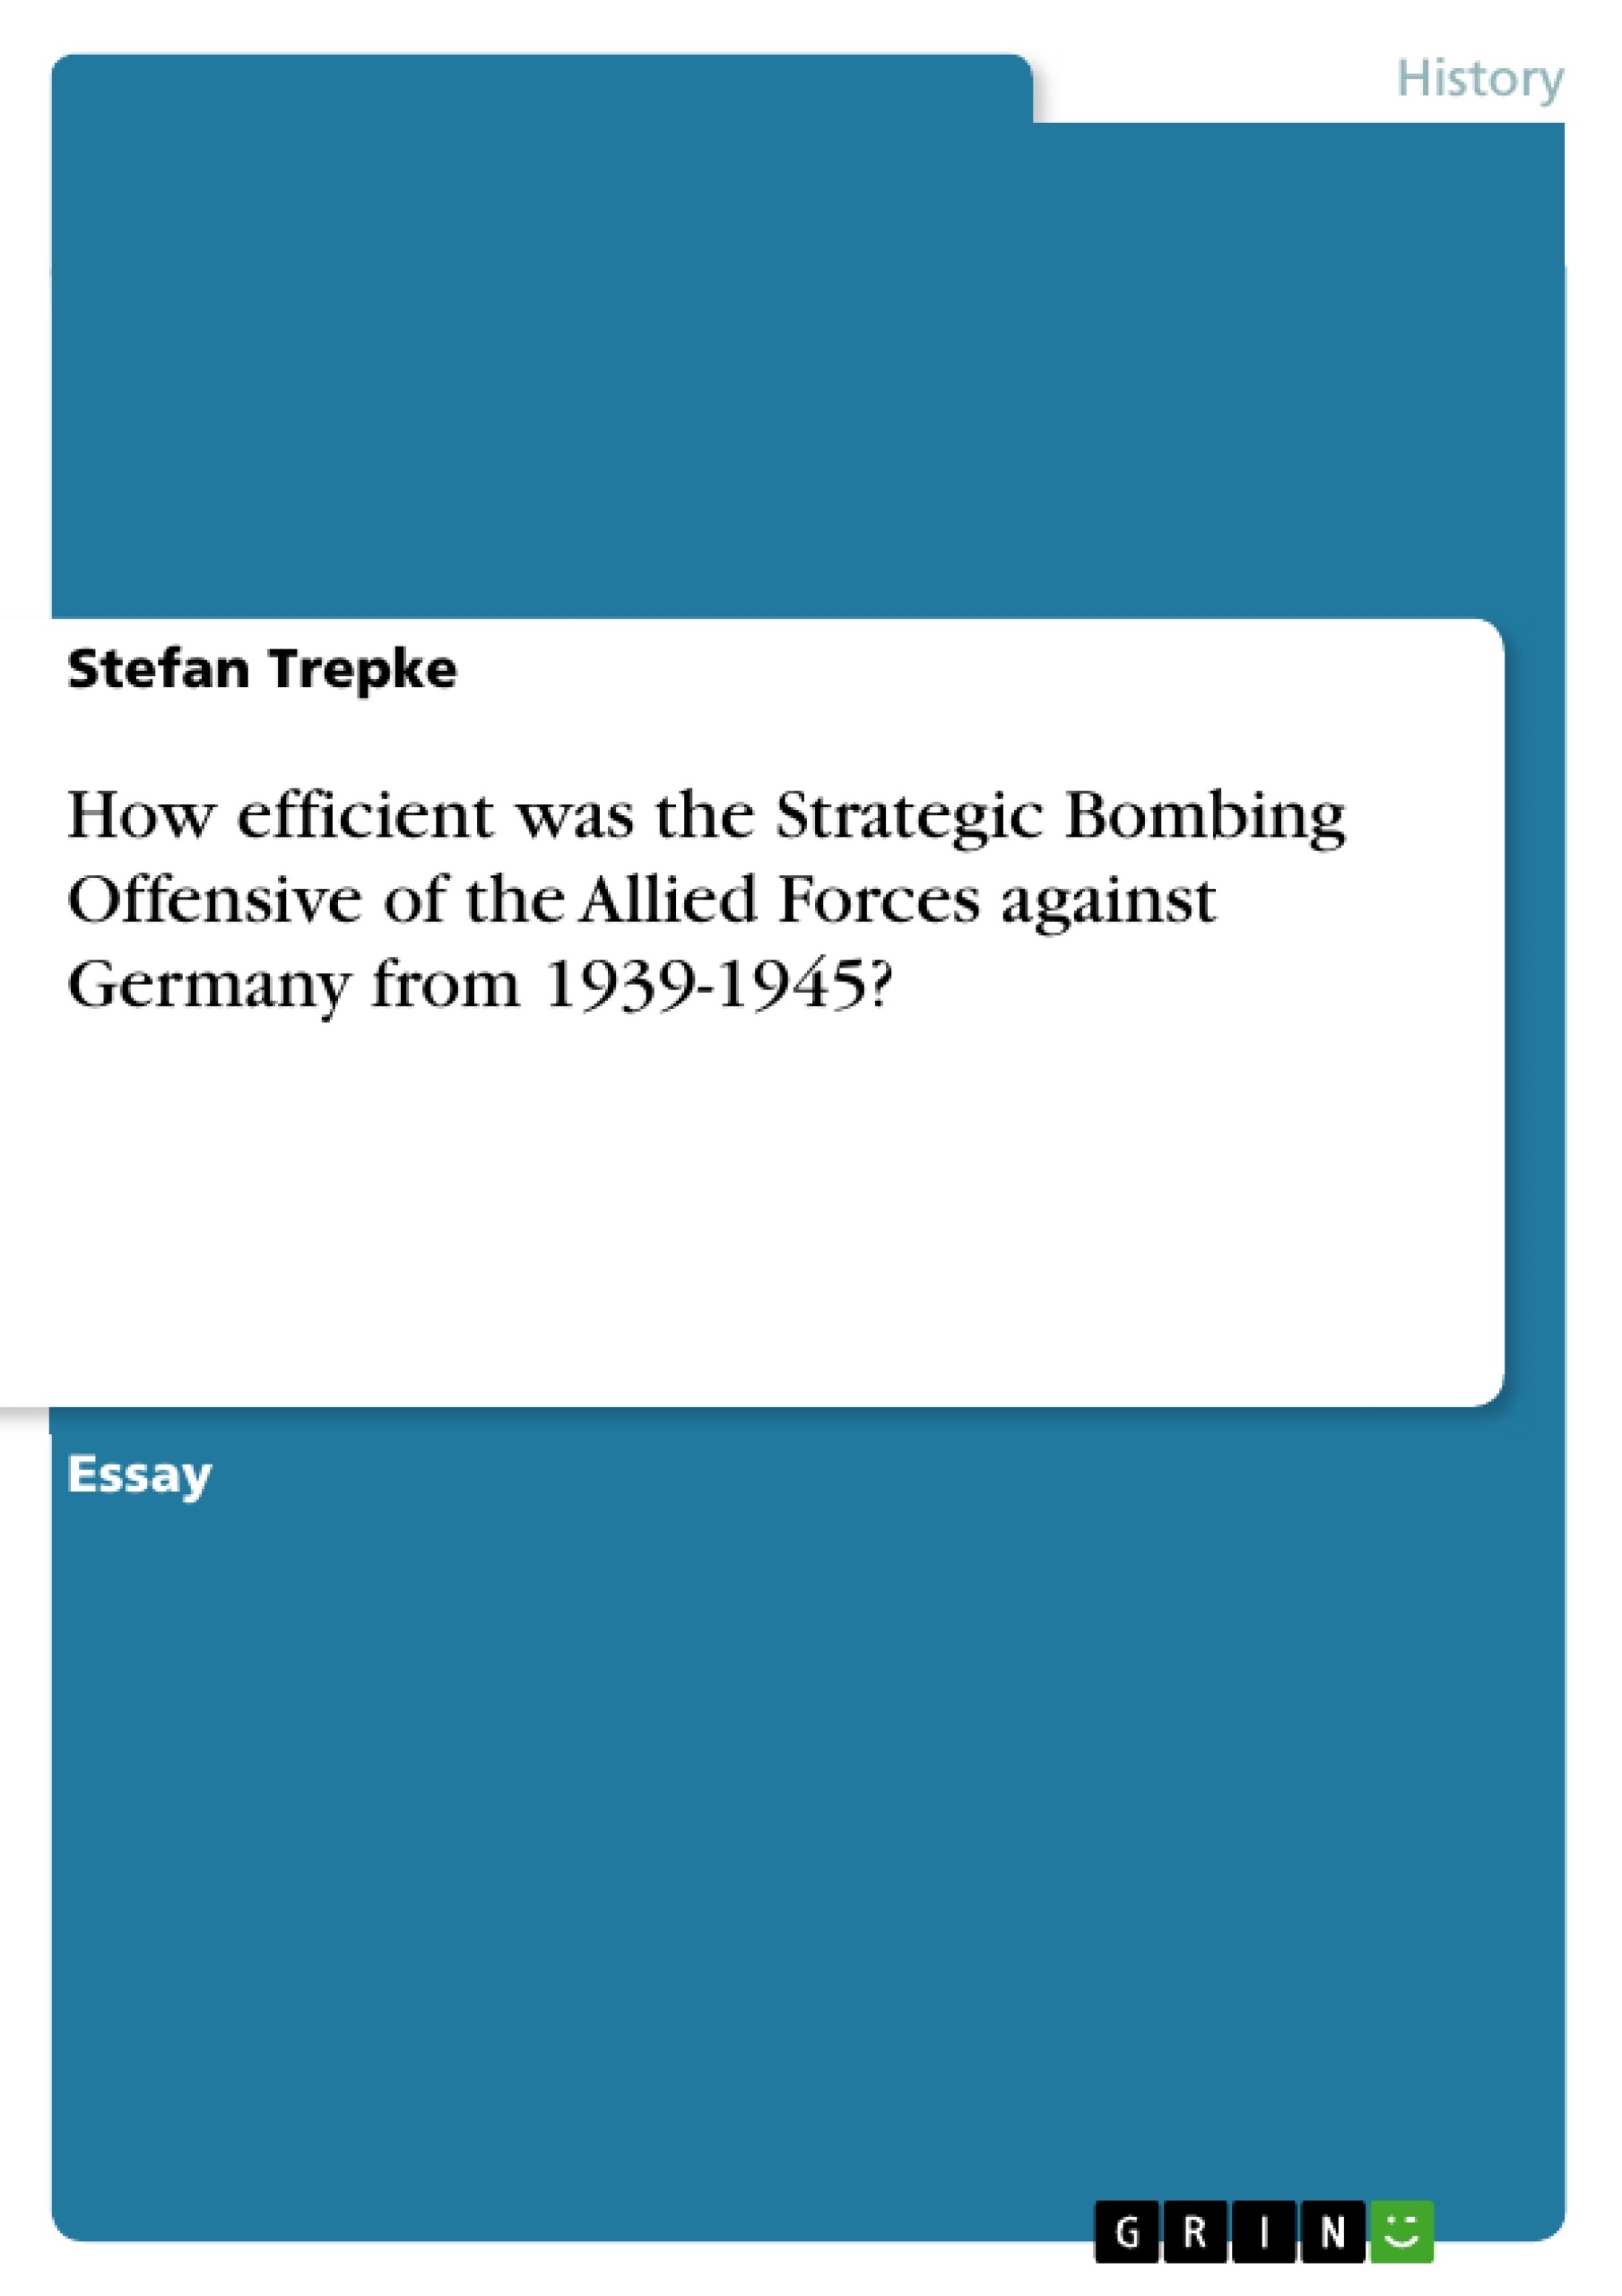 Title: How efficient was the Strategic Bombing Offensive of the Allied Forces against Germany from 1939-1945?